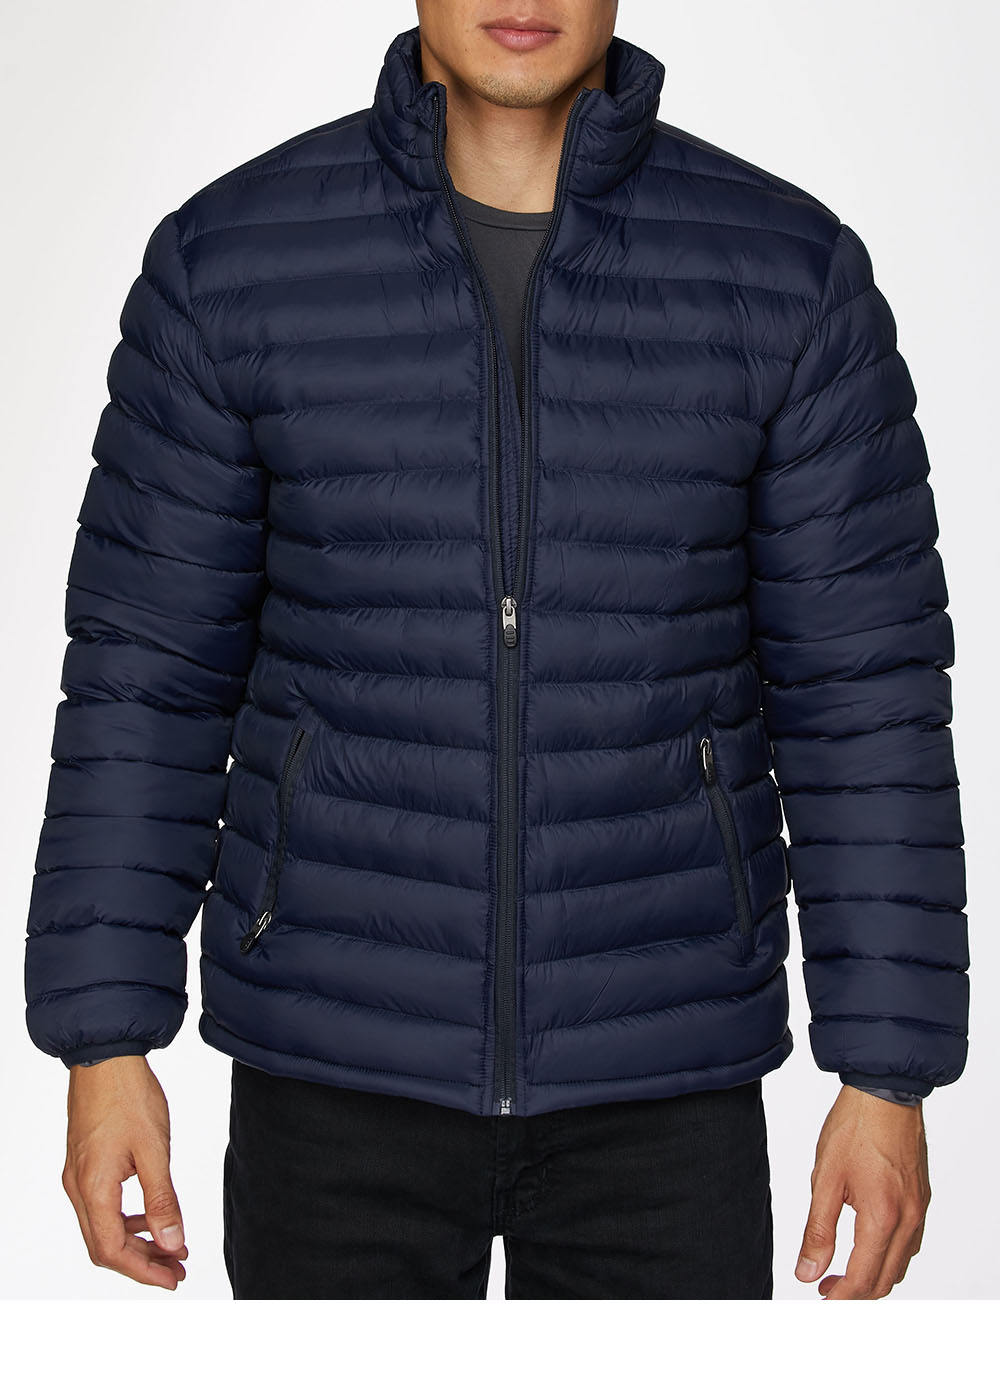 NYLON QUILTED JACKET-Navy